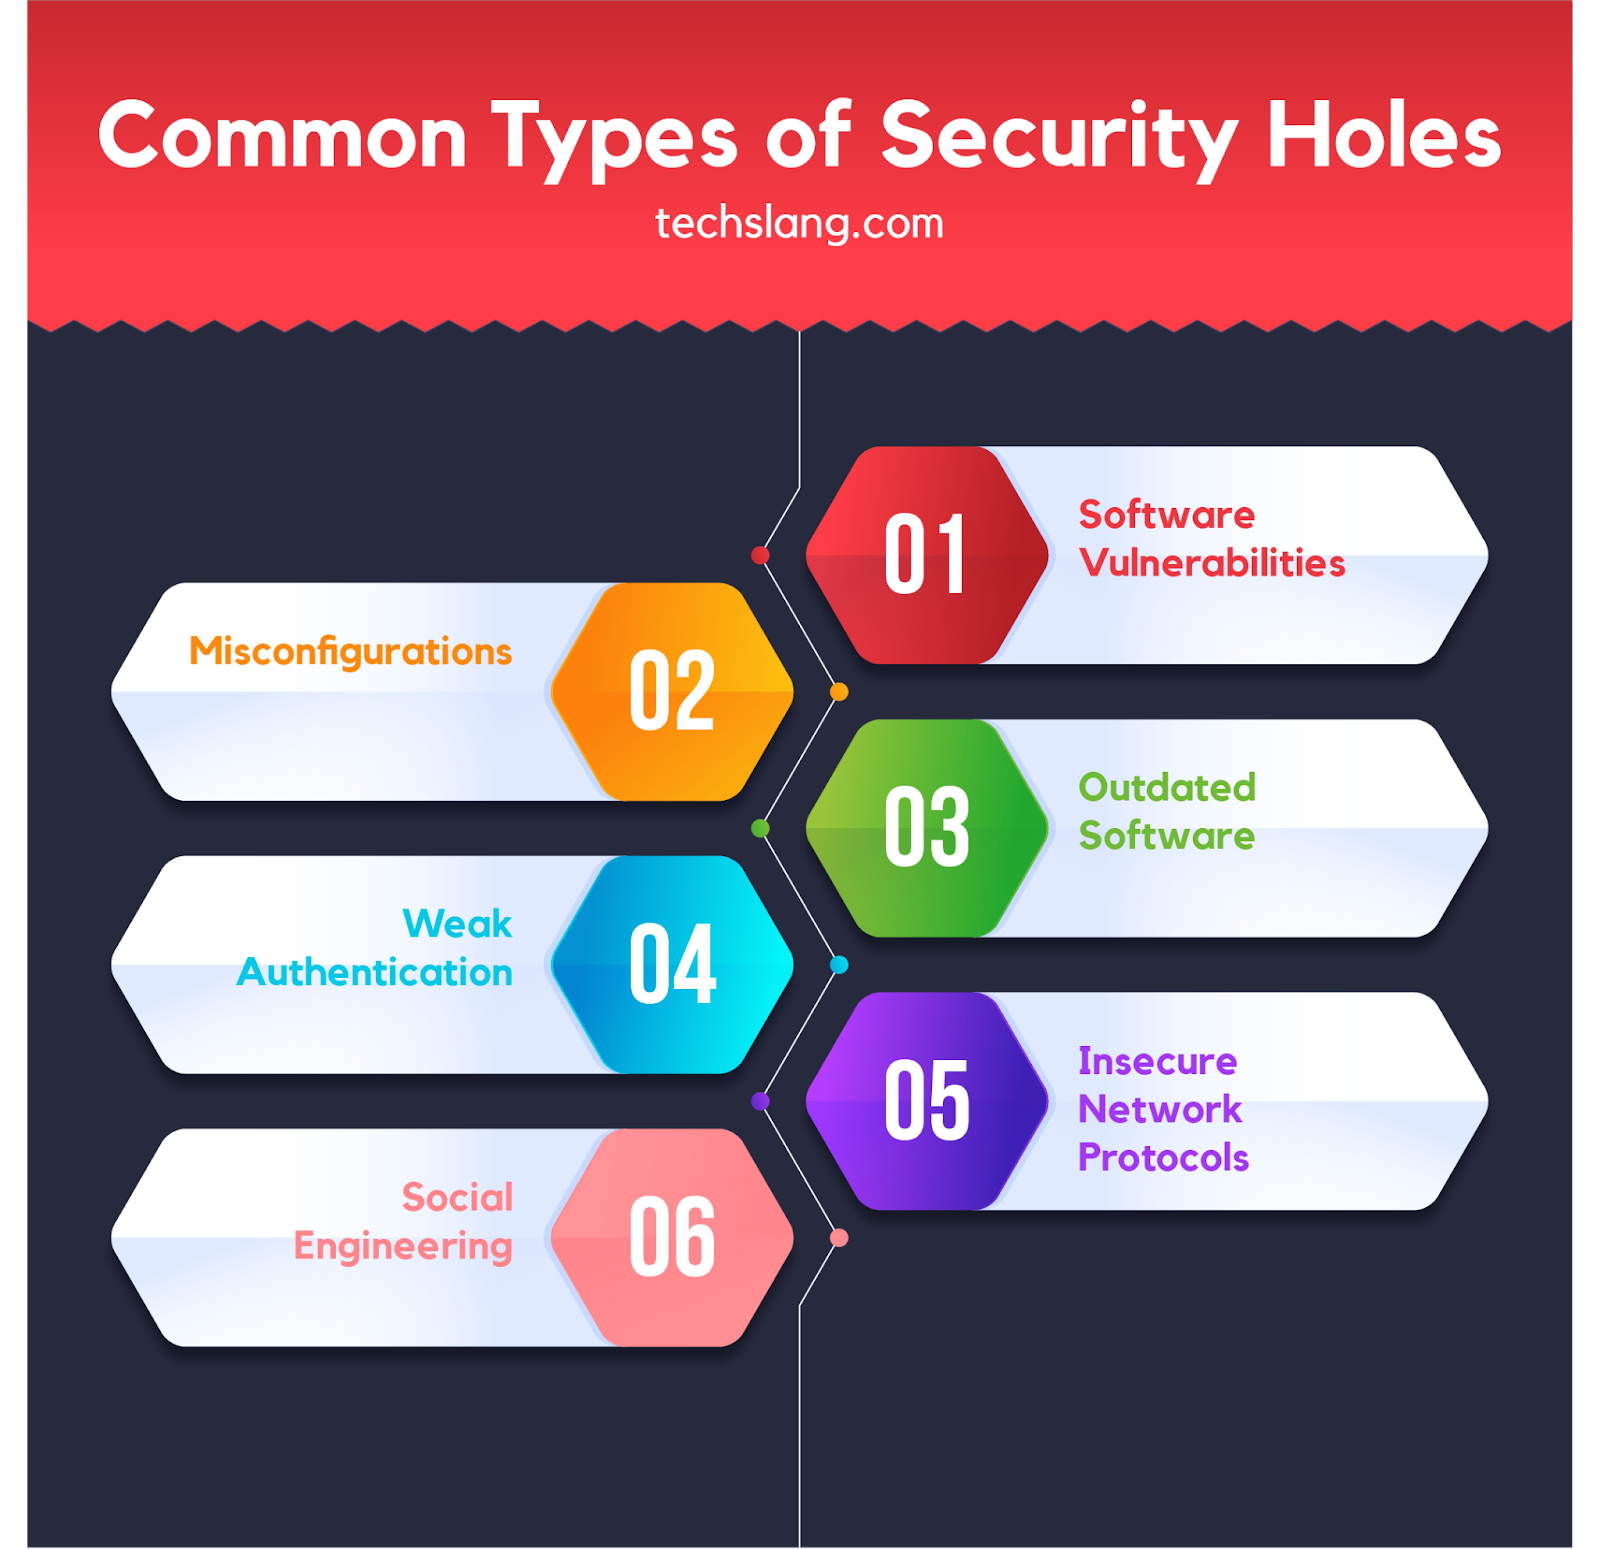 Common Types of Security Holes